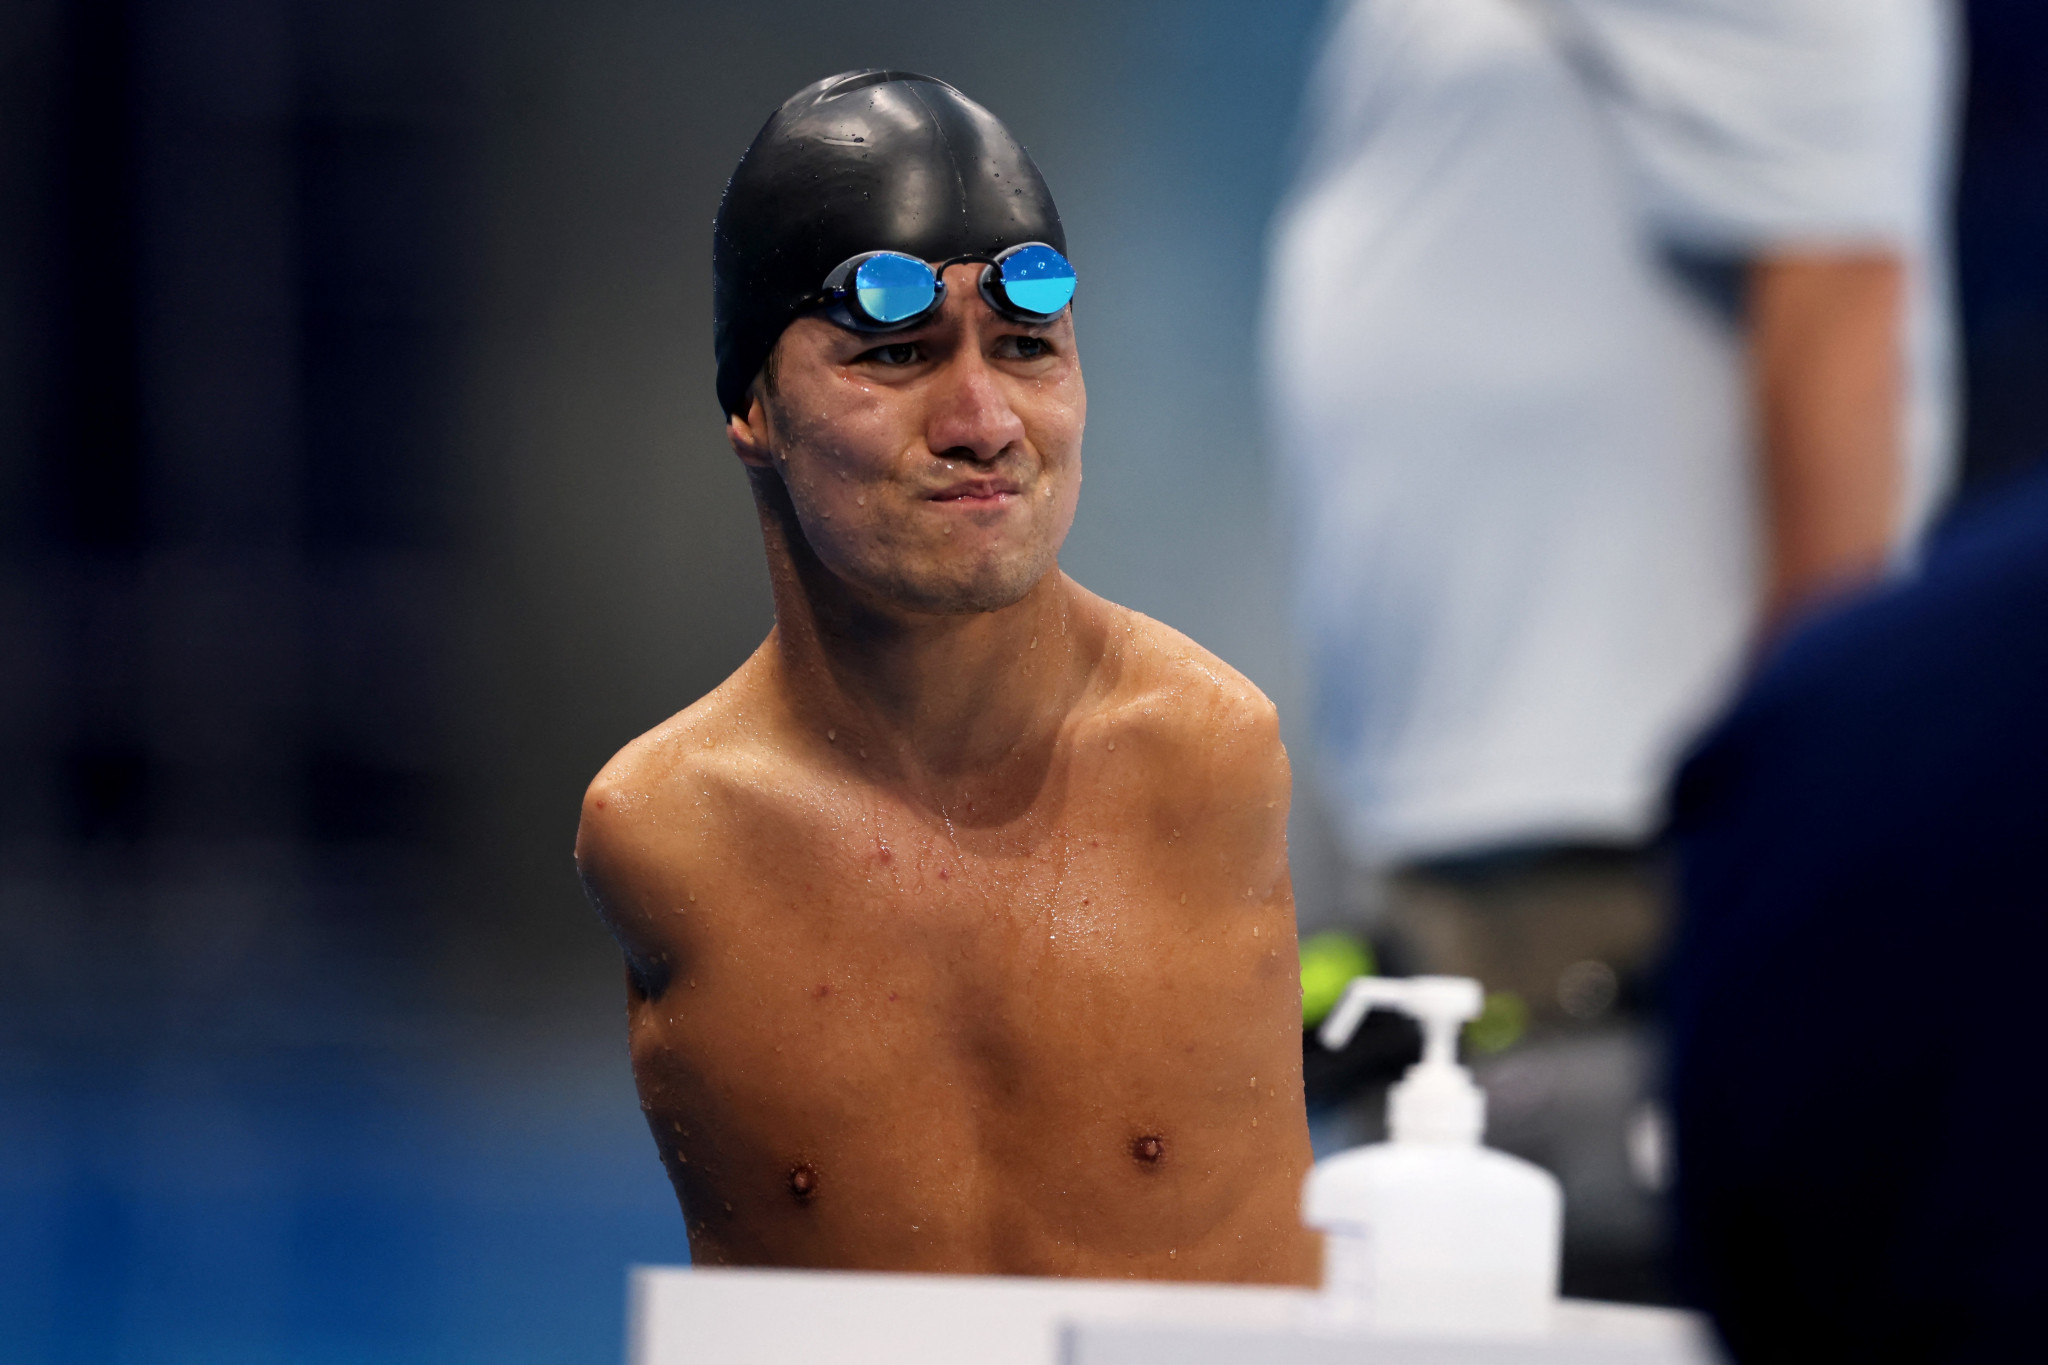 Abbas Karimi won gold for the first time since being granted American citizenship ©Getty Images